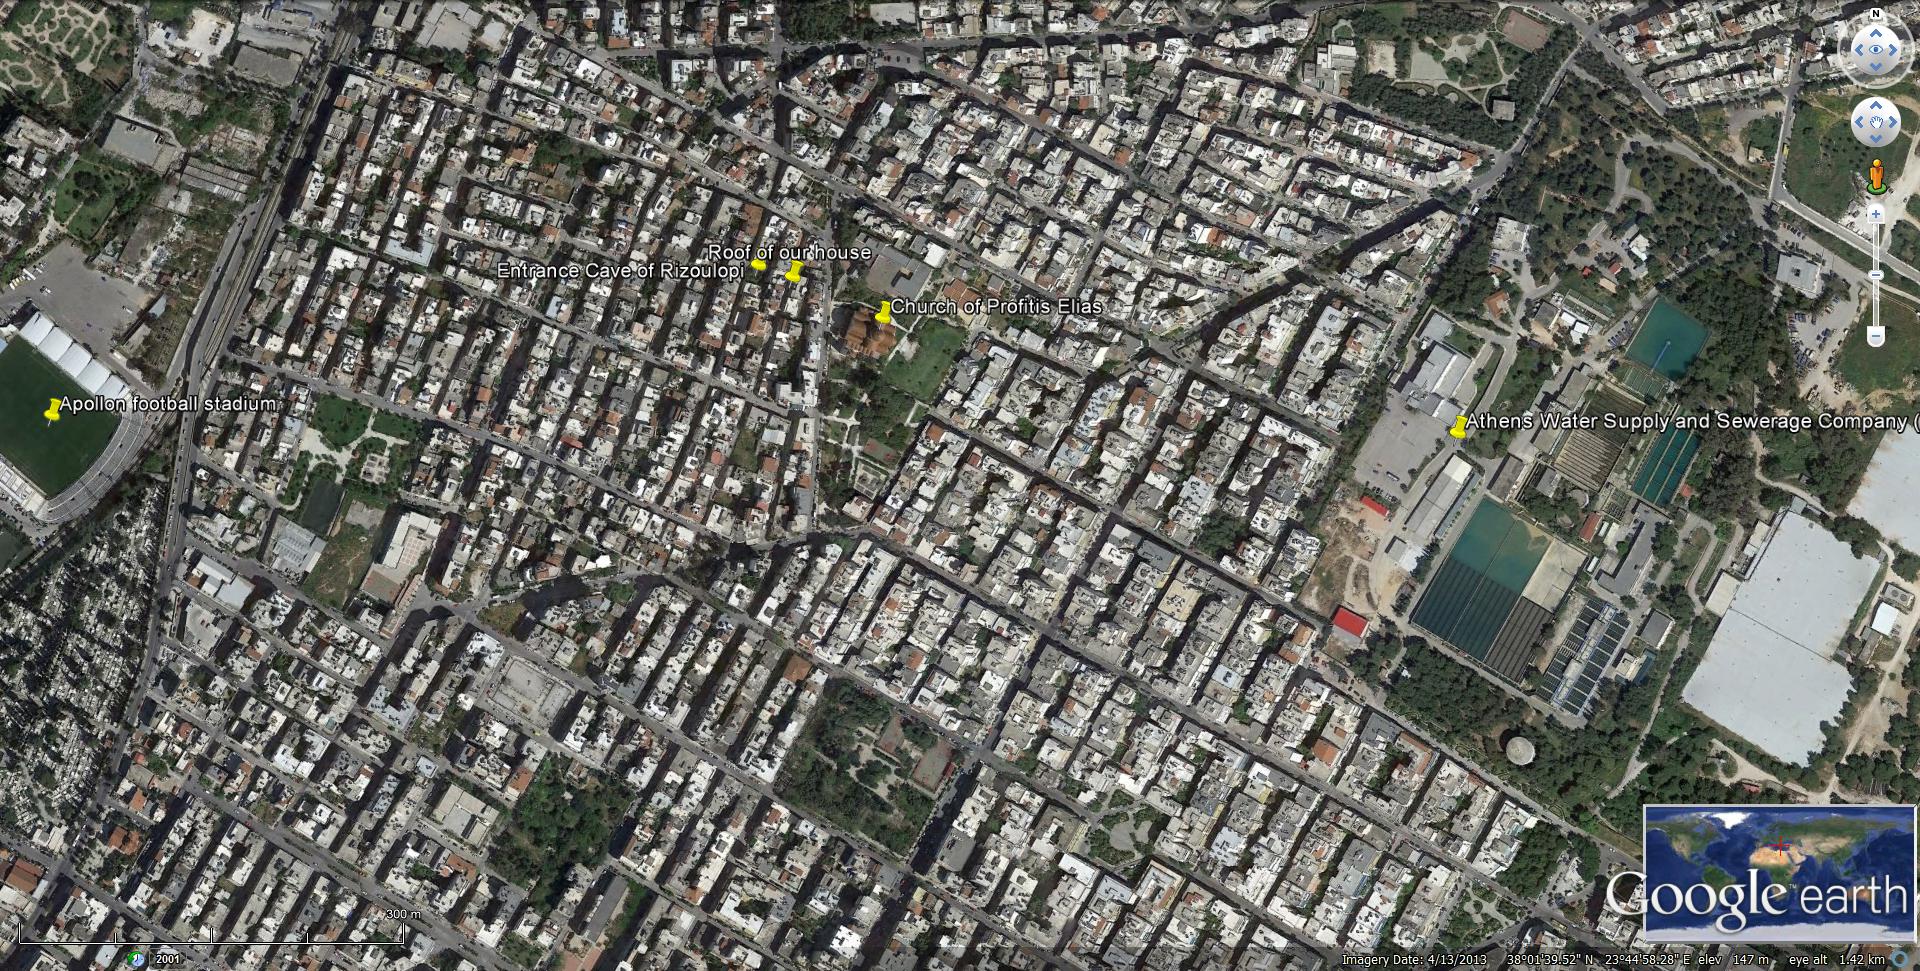 Surface area of Rizoupoli, from Google Earth, scale 1:300